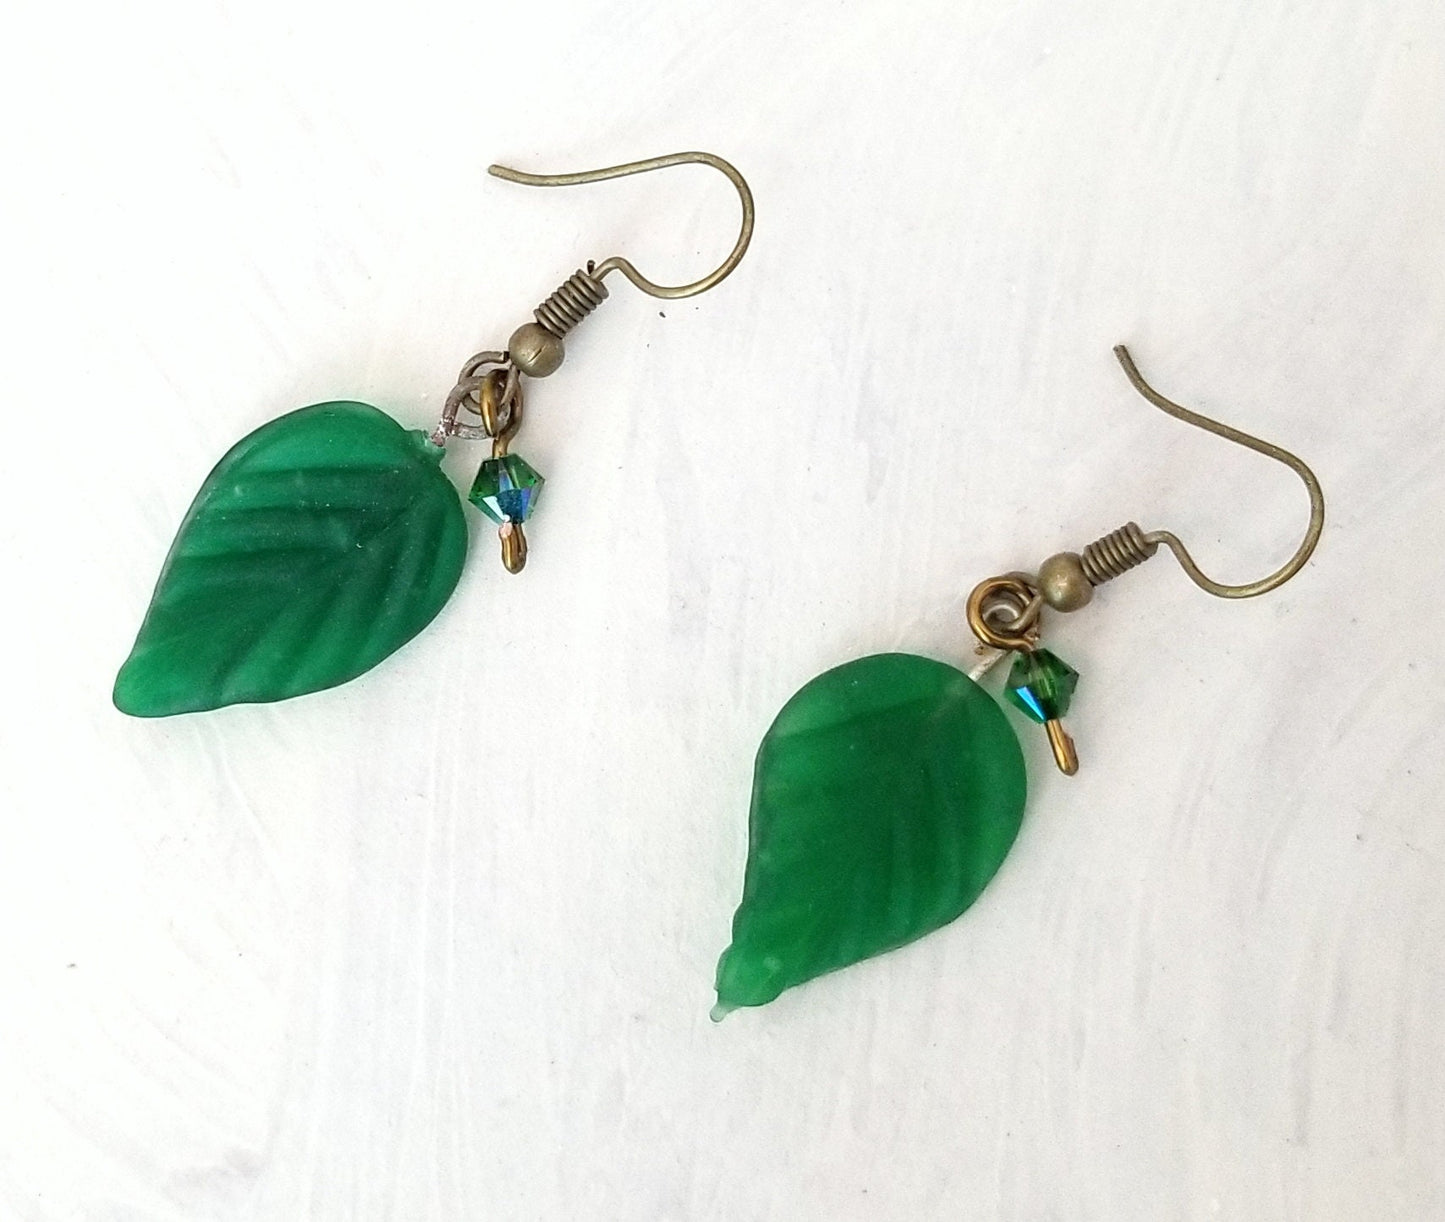 Long Glass Leaf Earrings in Frosted Green, Wedding, Bridesmaid, Art Nouveau, Renaissance, Forest, Choice of Closure Types